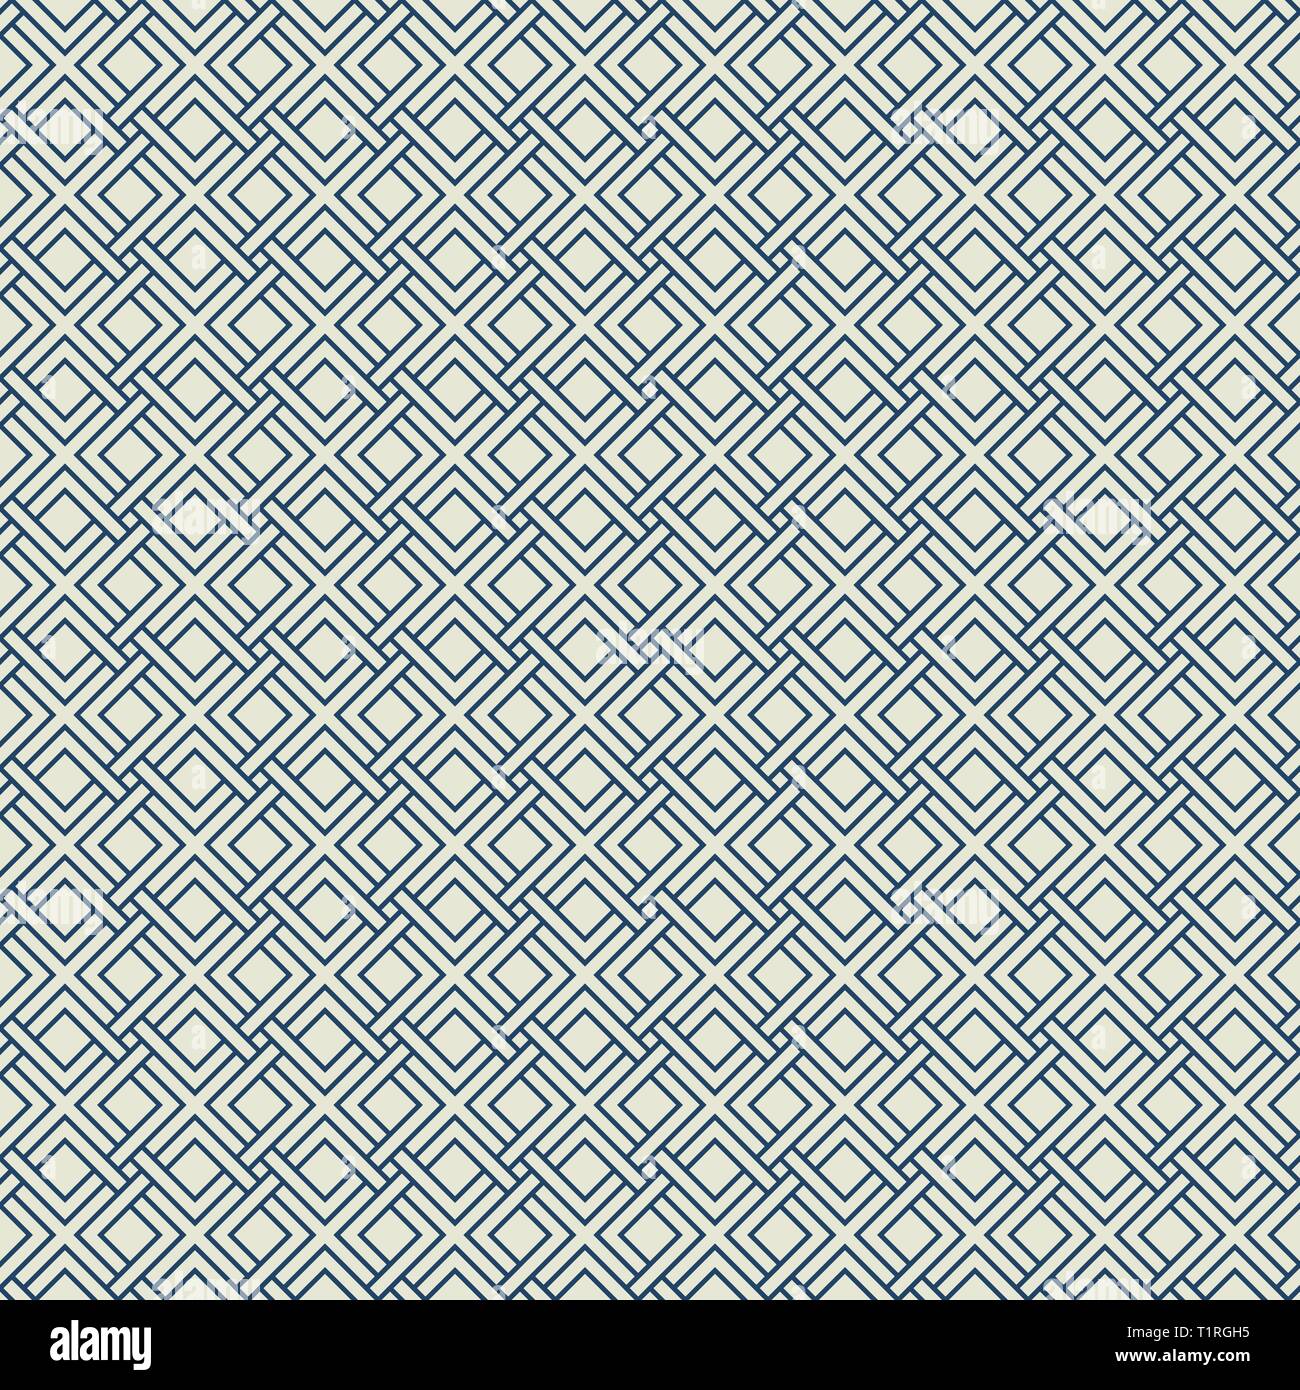 Abstract modern square pattern design of seamless background. You can use for trendy style of cover, ad, print, artwork. illustration vector eps10 Stock Vector